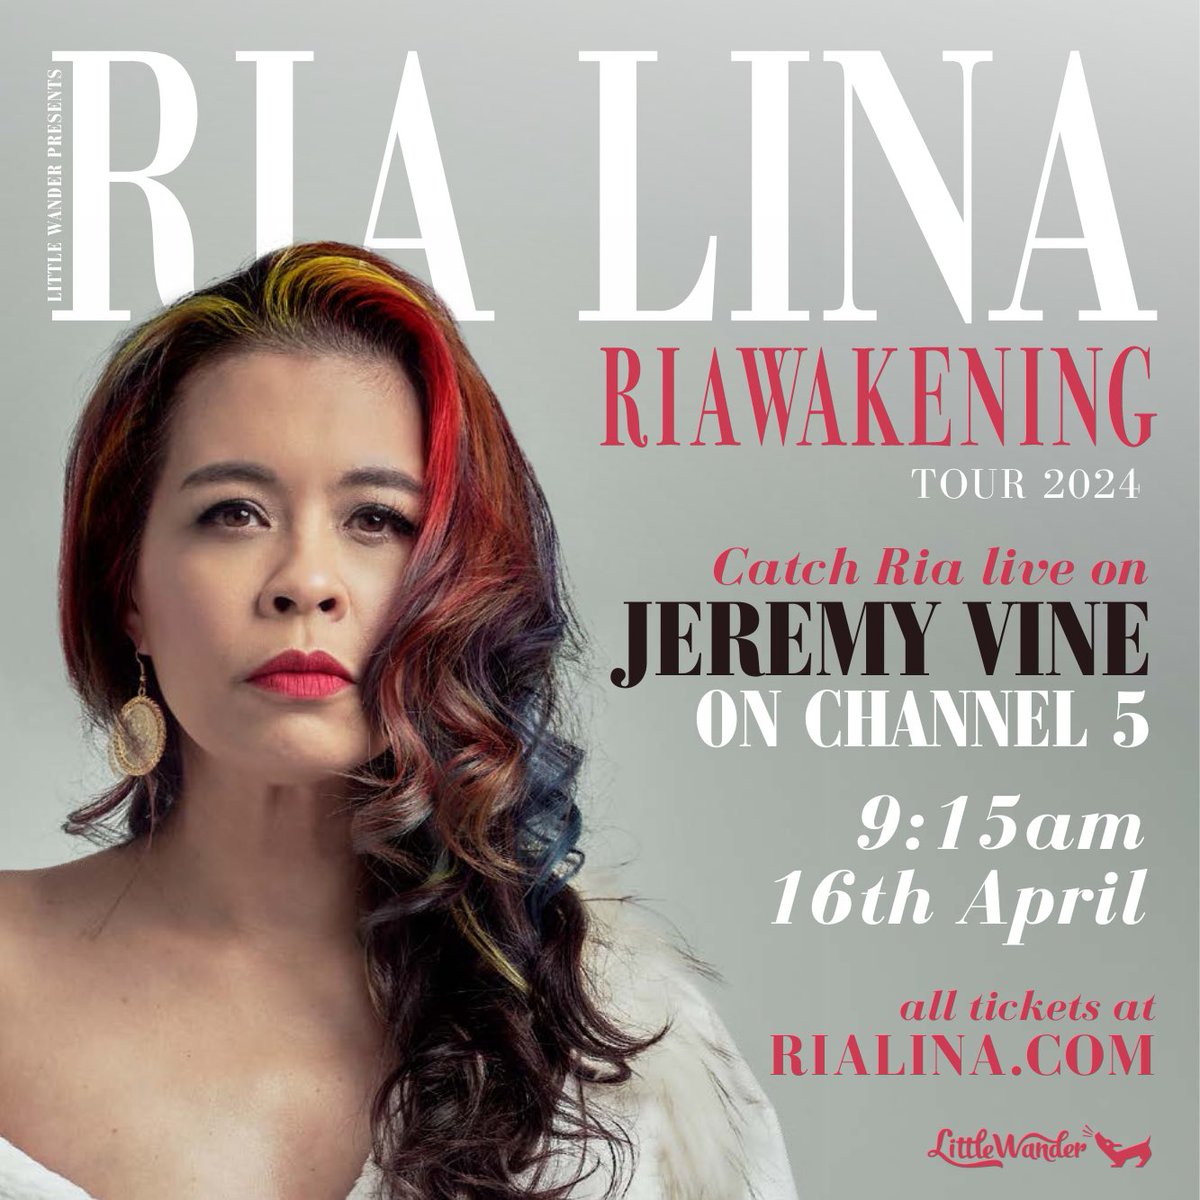 RIA LINA is a guest on Jeremy Vine’s Channel 5 show tomorrow at 9:15 am! Ria will be talking about her debut tour show RIAWAKENING, which is coming live to The Exchange on 25 April 😀 Watch live: channel5.com/channels/chann… Book tix at: exchangetwickenham.co.uk/event/ria-lina… @rialina_